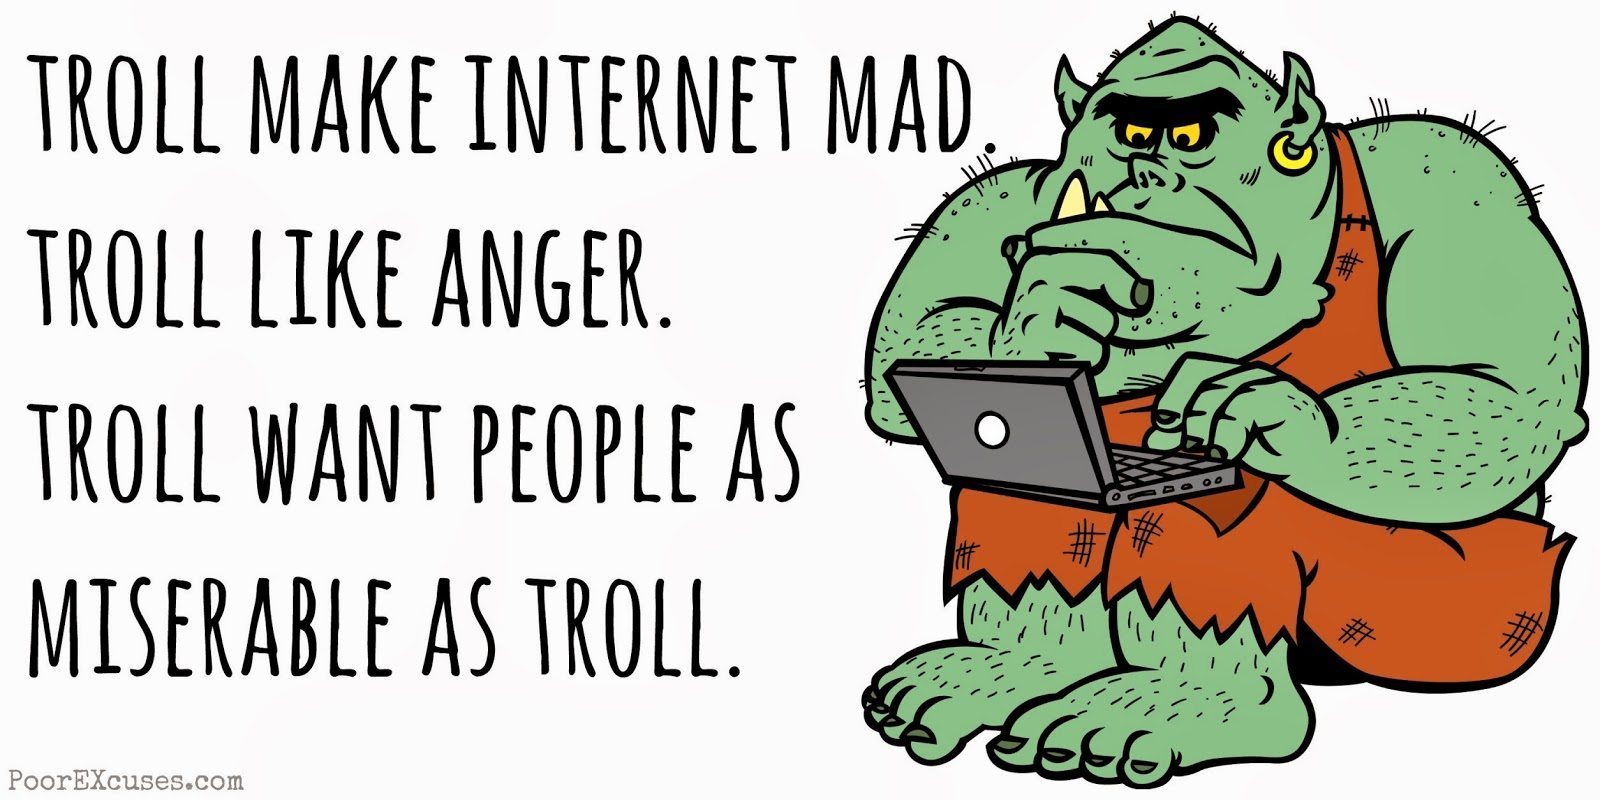 That Word, I Don't Think It Means What You Think It Means - Art of Trolling  - Troll, Trolling, Yahoo Answers